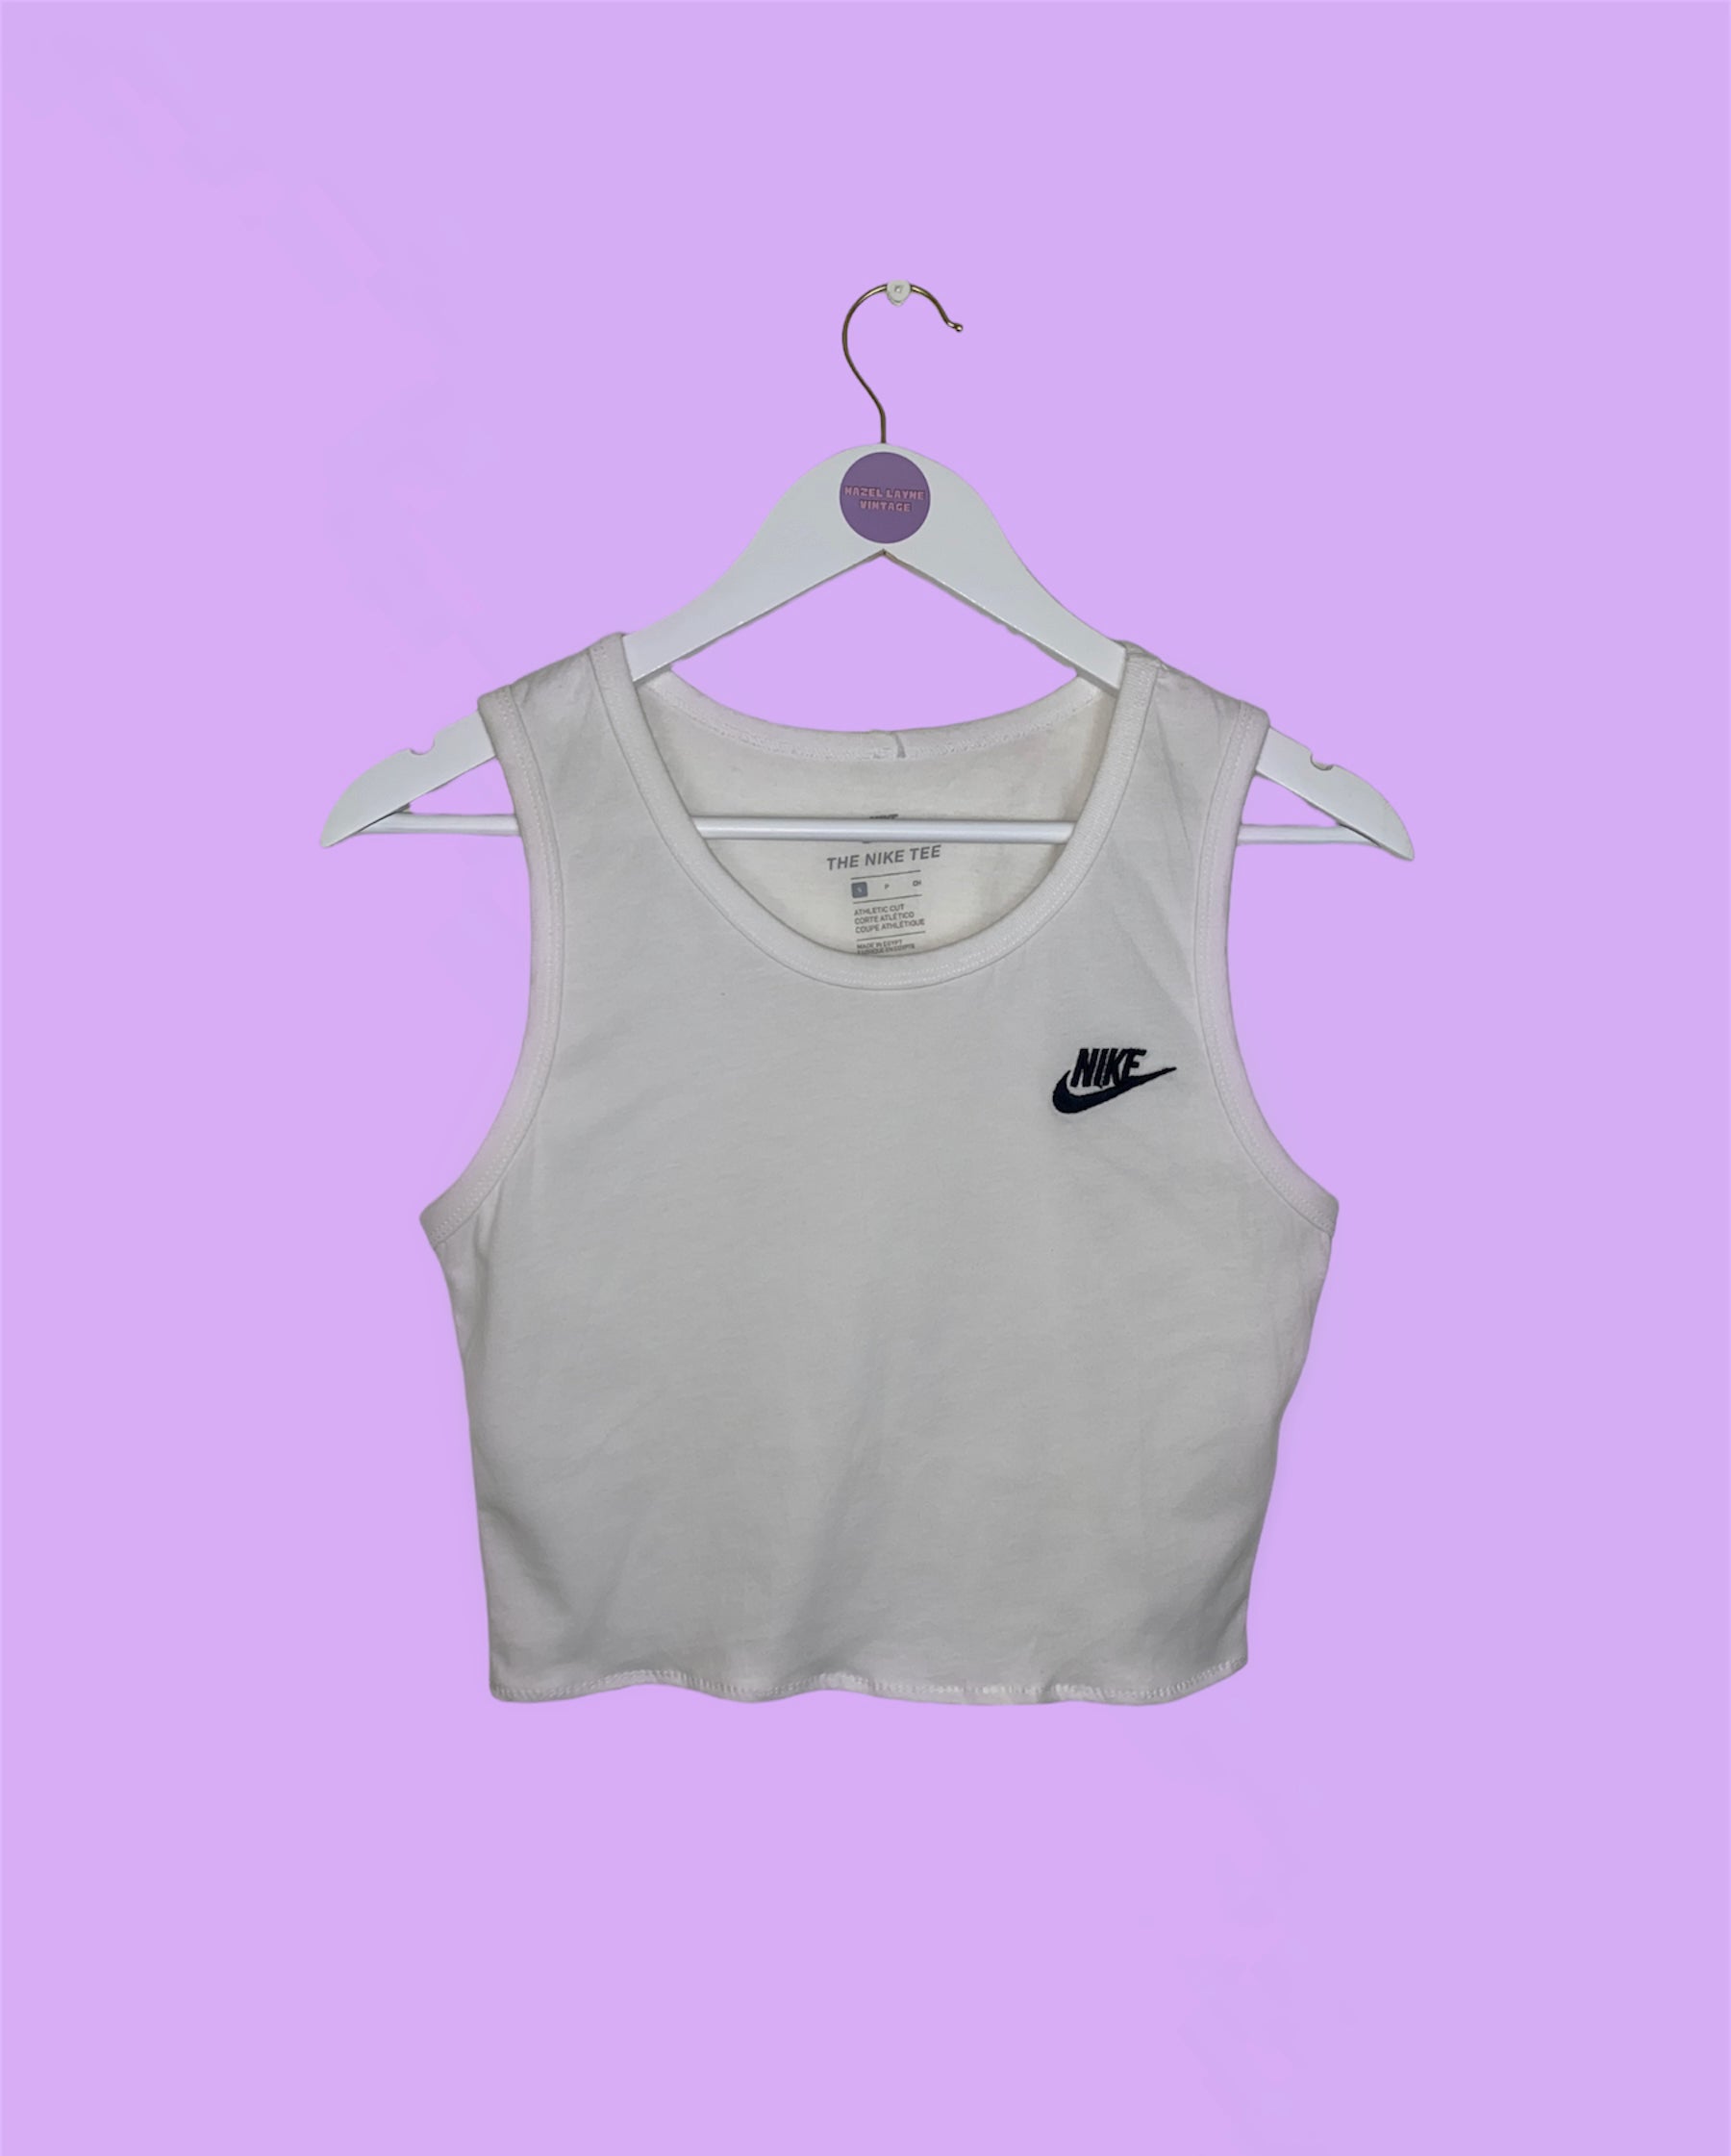 white short sleeve crop top with black nike logo shown on a white clothes hanger on a lilac background